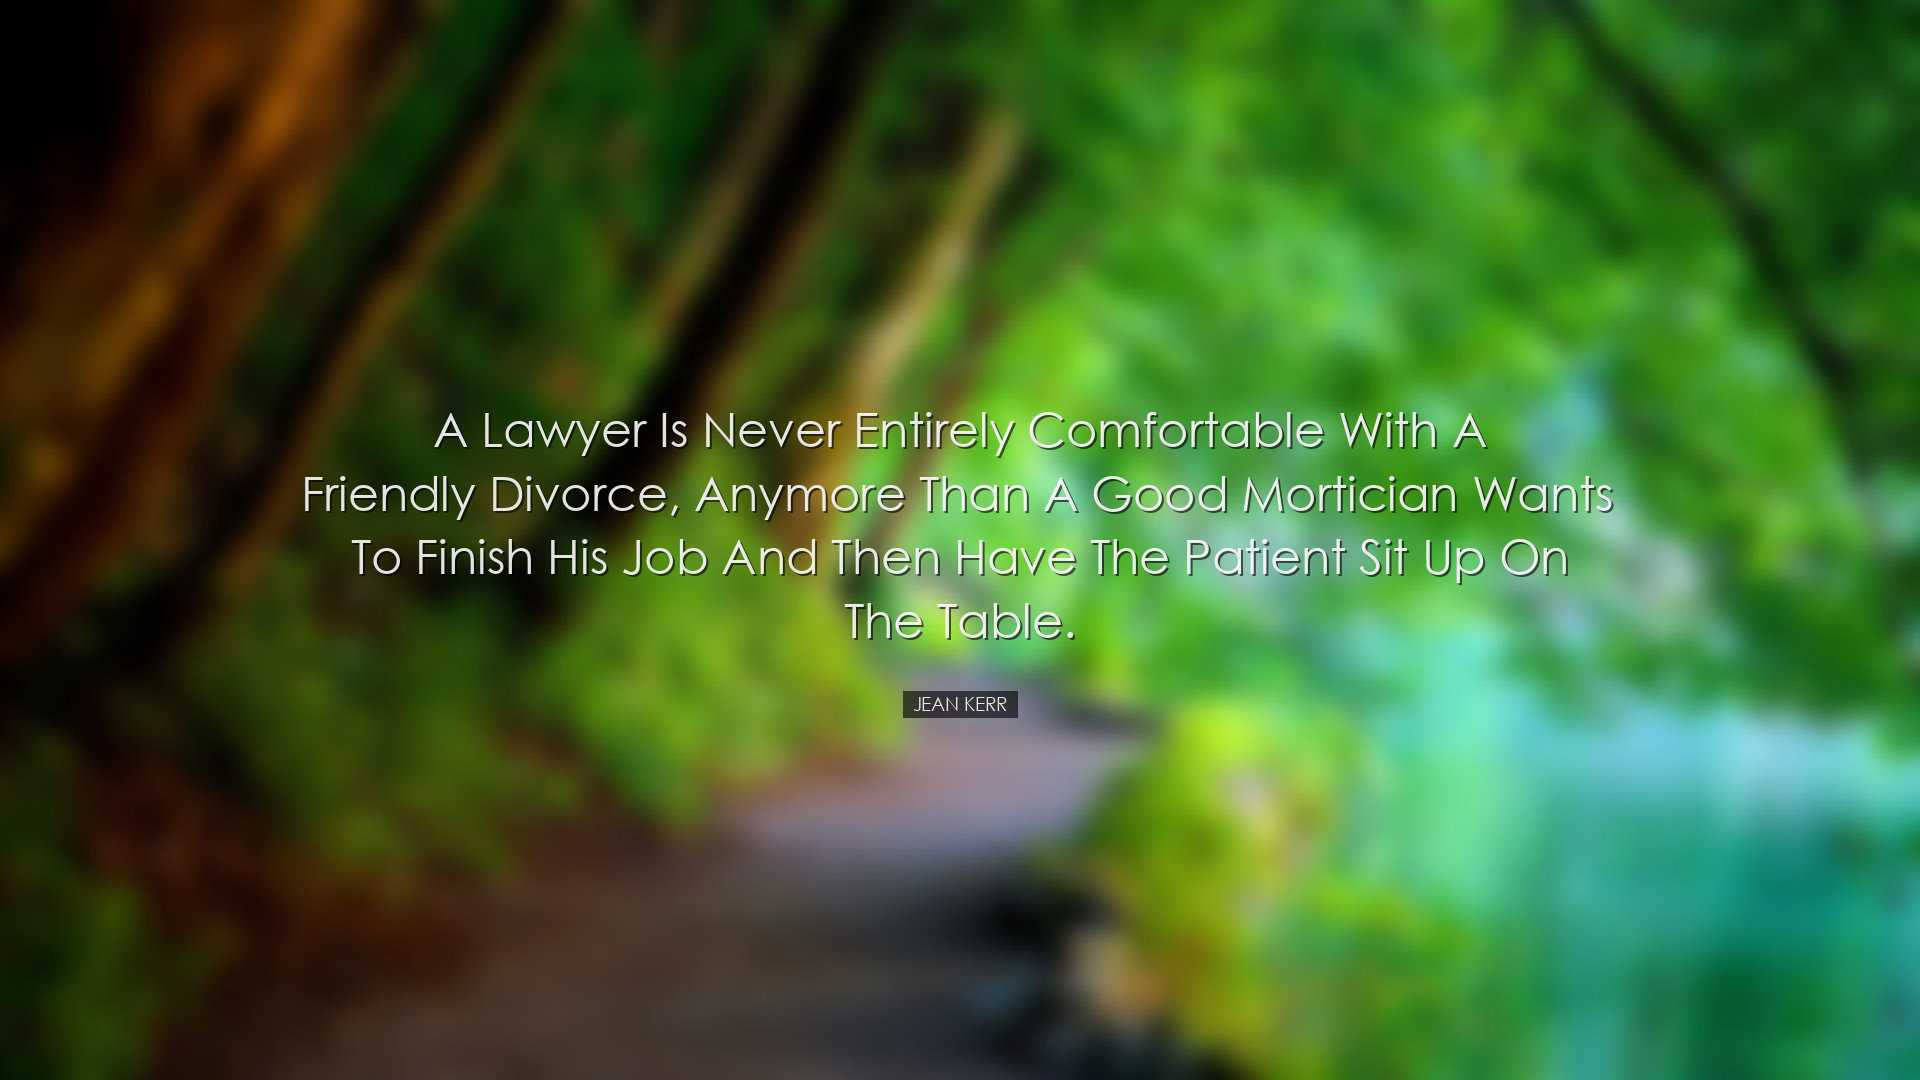 A lawyer is never entirely comfortable with a friendly divorce, an